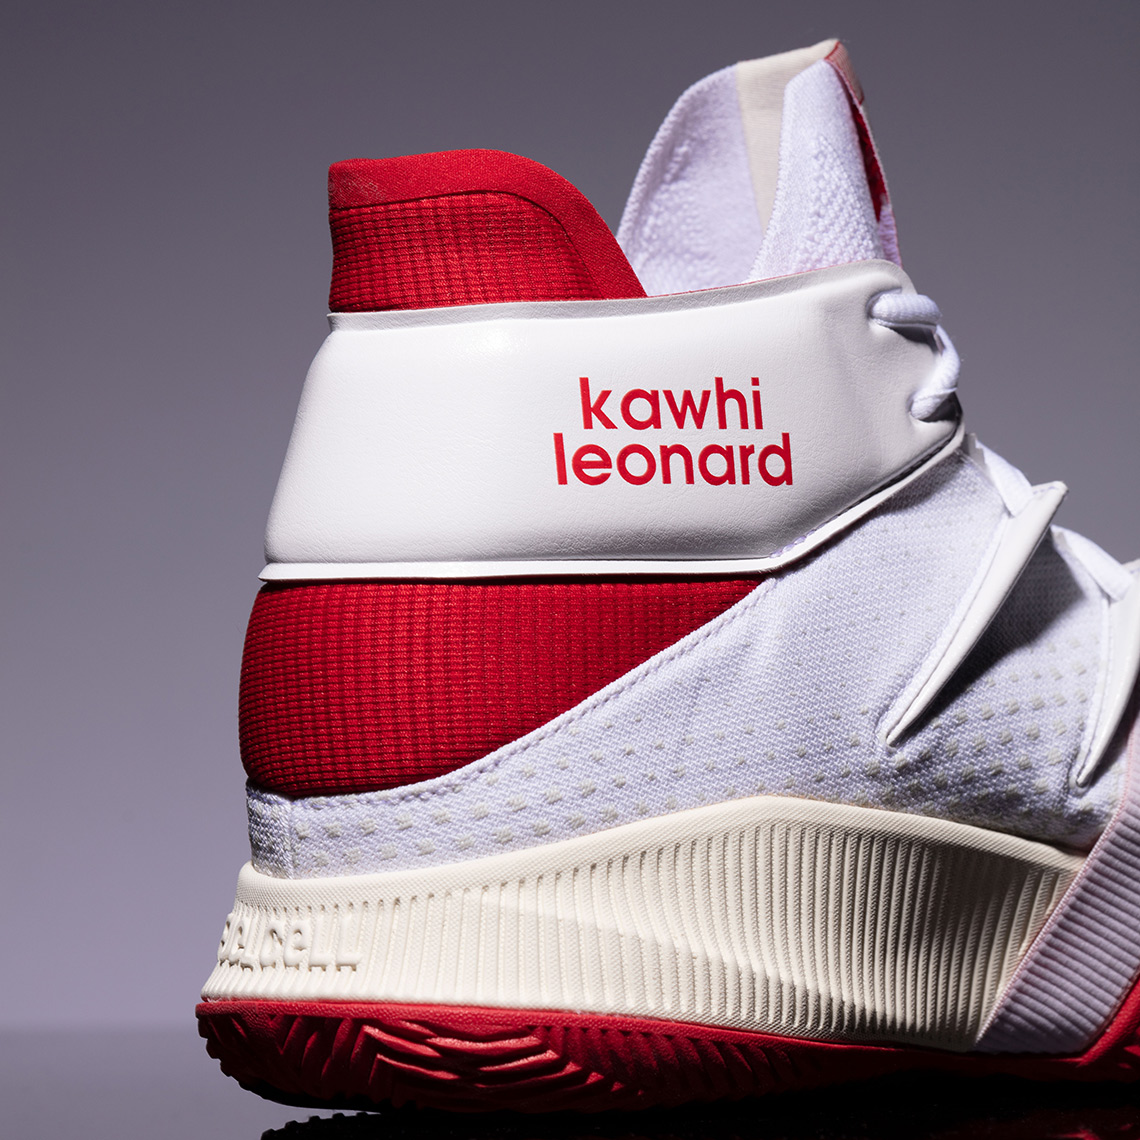 when are kawhi's shoes coming out